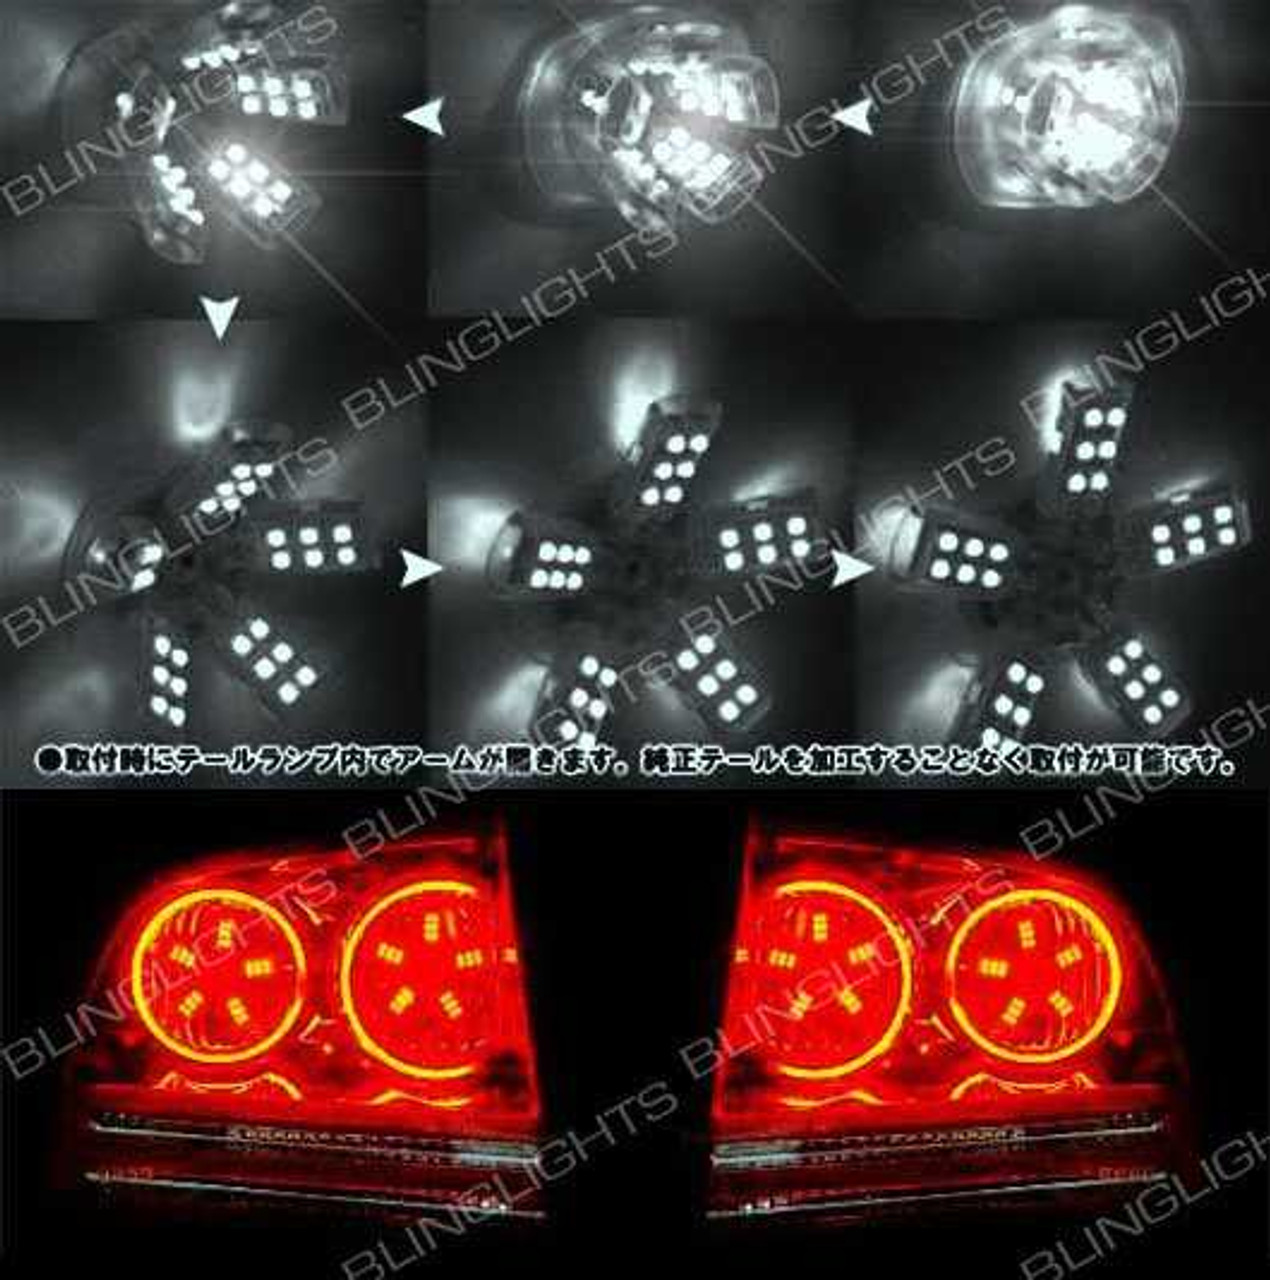 White 1157 Spider Lite Bulbs Dual Intensity Tail Lamp Replacement Light Bulbs Set